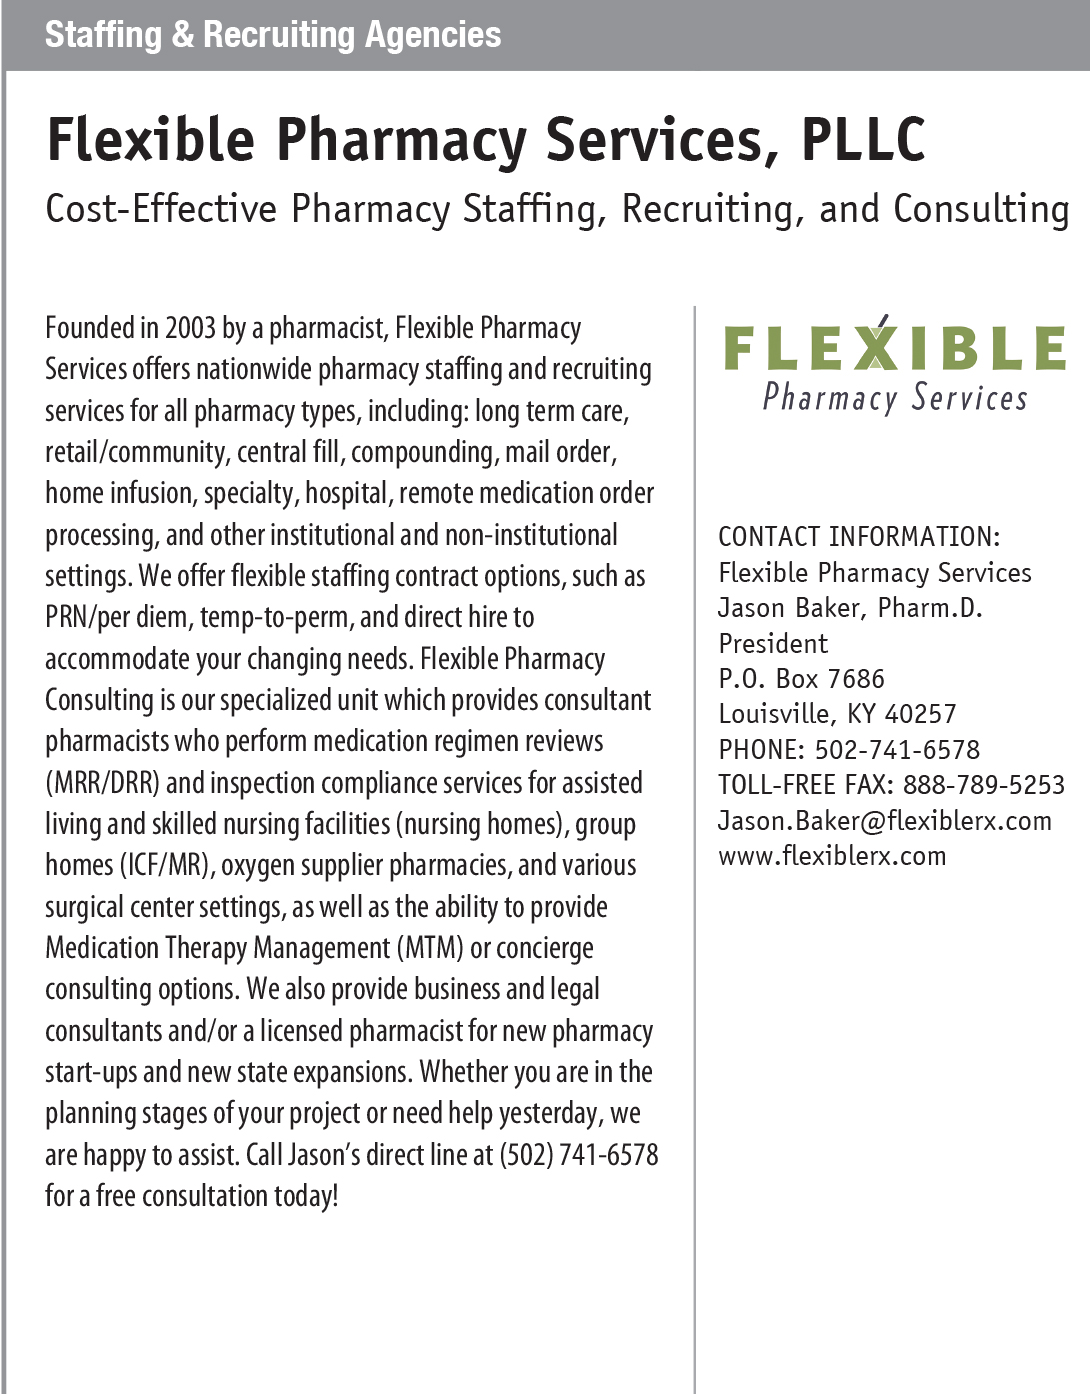 PROFILE_Staffing-_-Recruiting-Agencies---Flexible-Pharmacy-Services,-PLLC.jpg